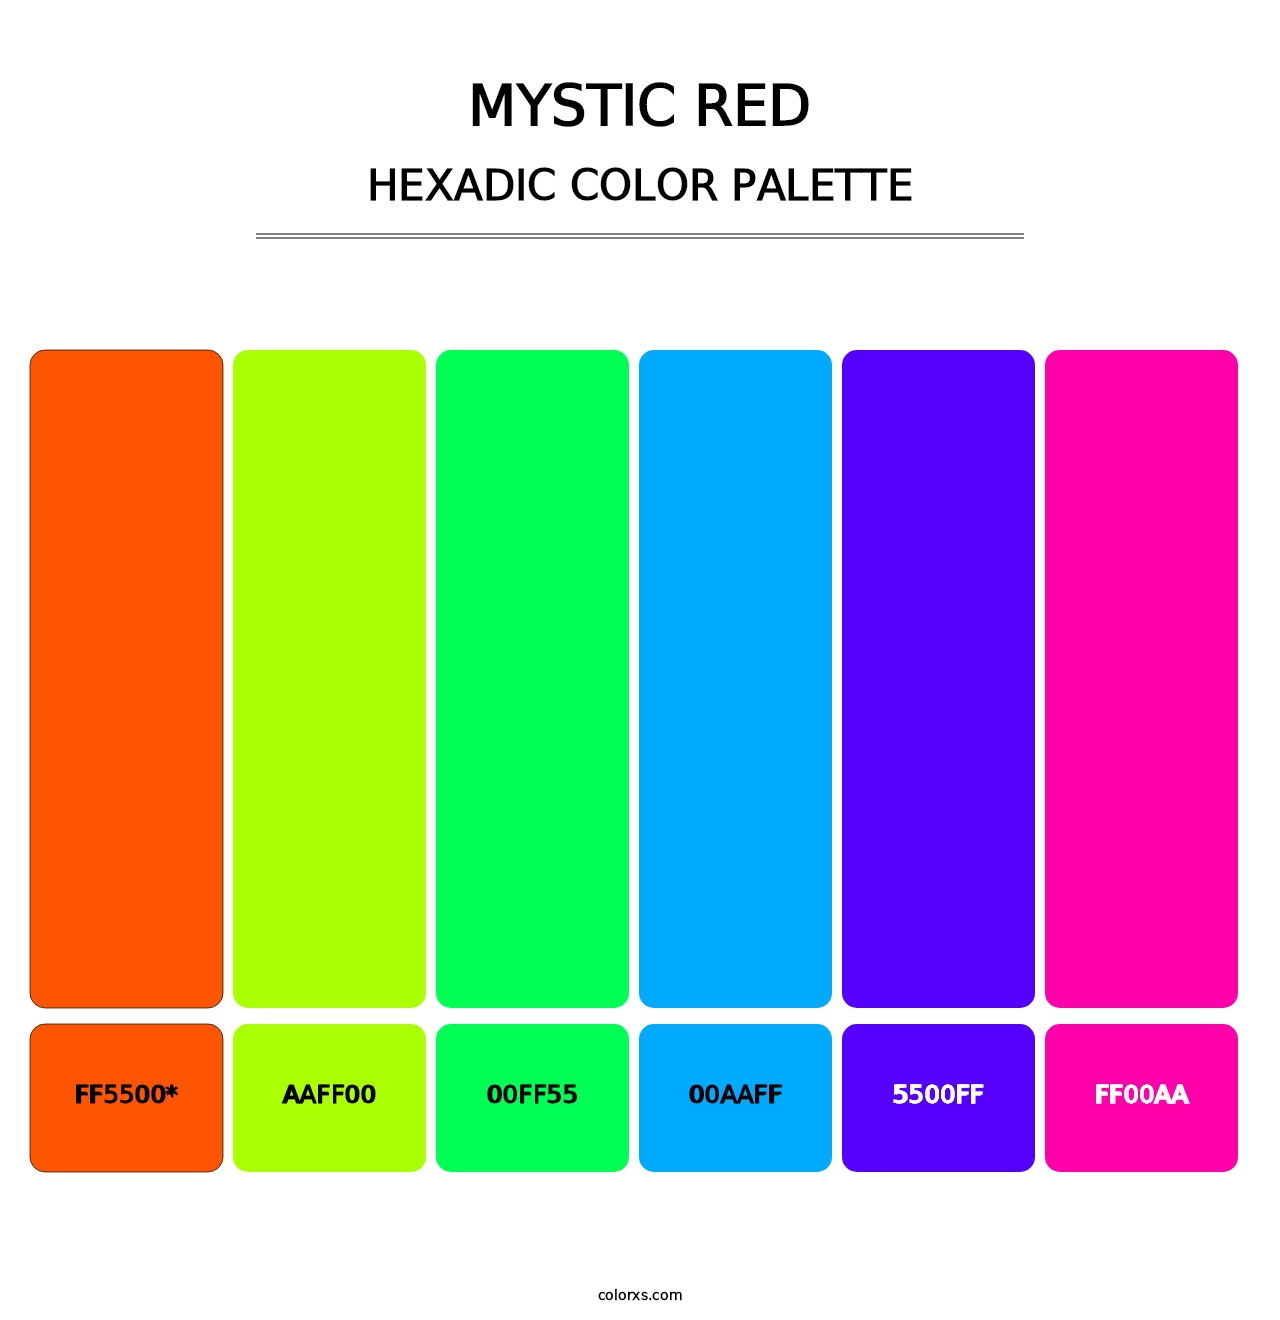 Mystic Red - Hexadic Color Palette